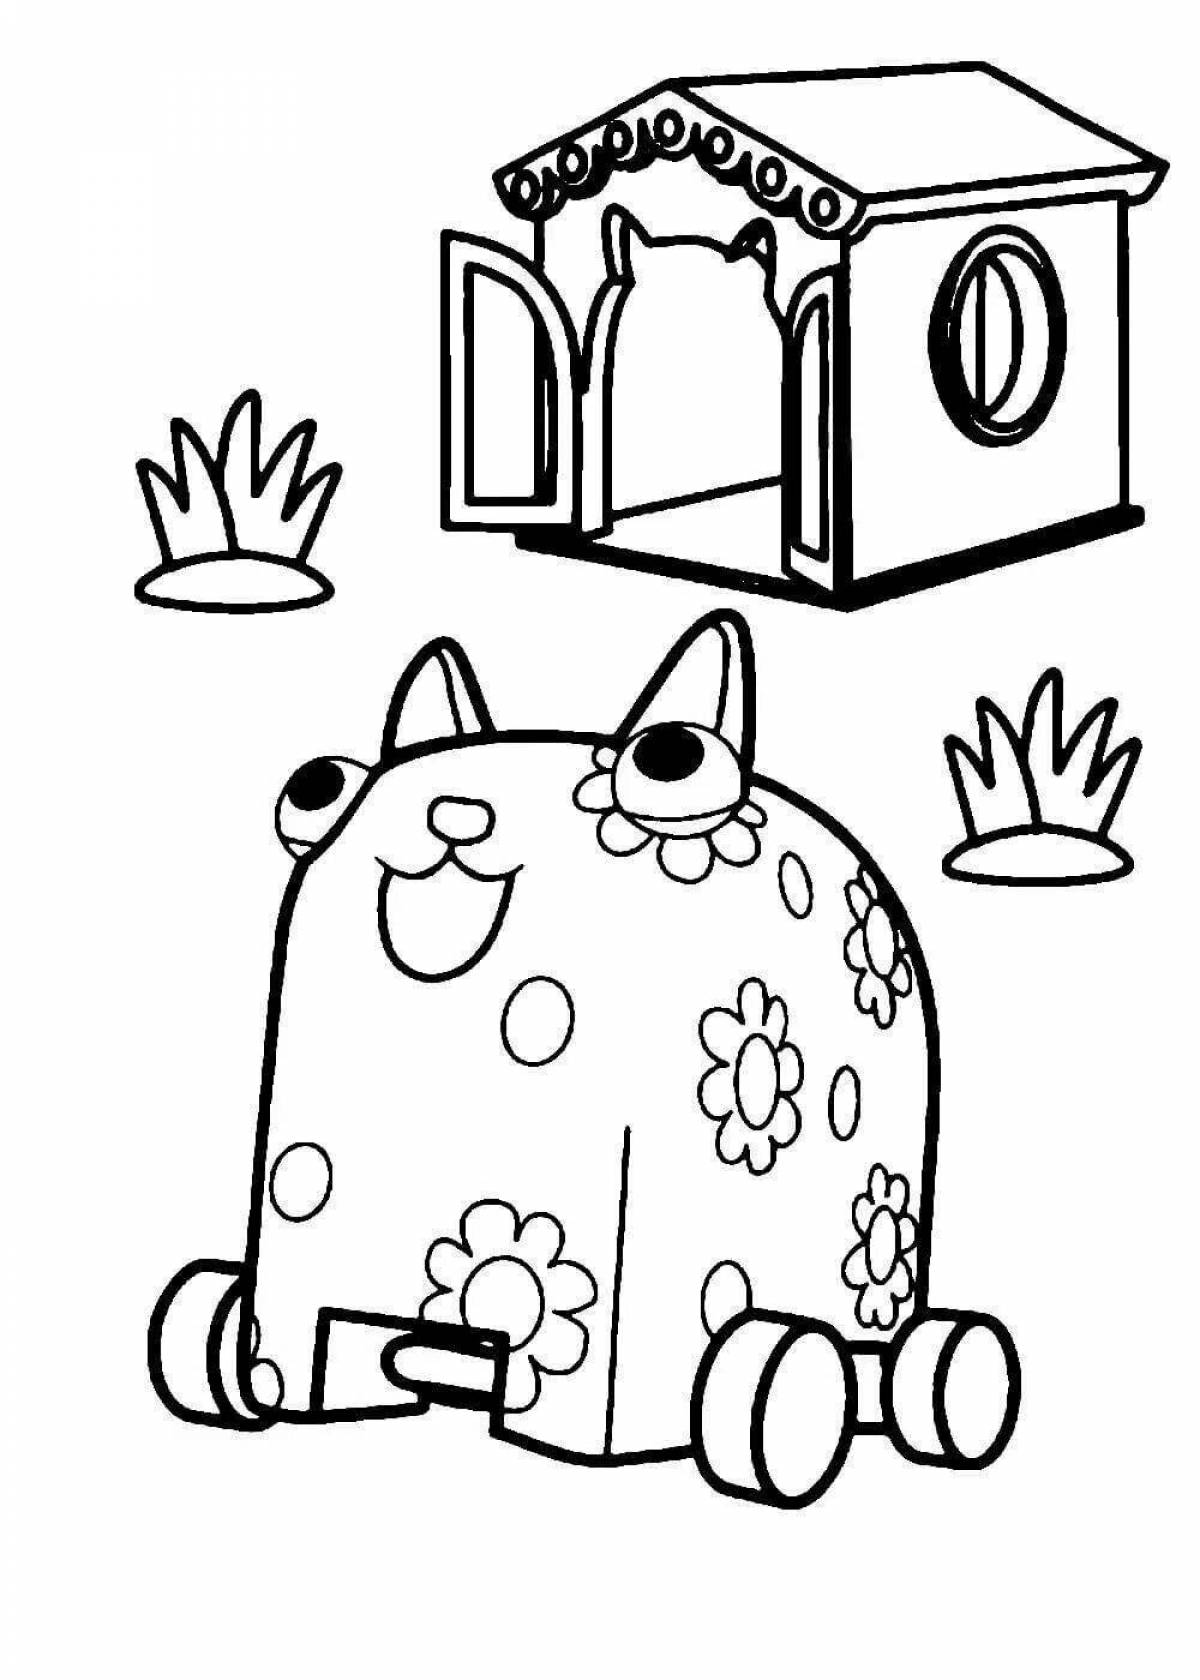 Exotic wooden dog coloring page